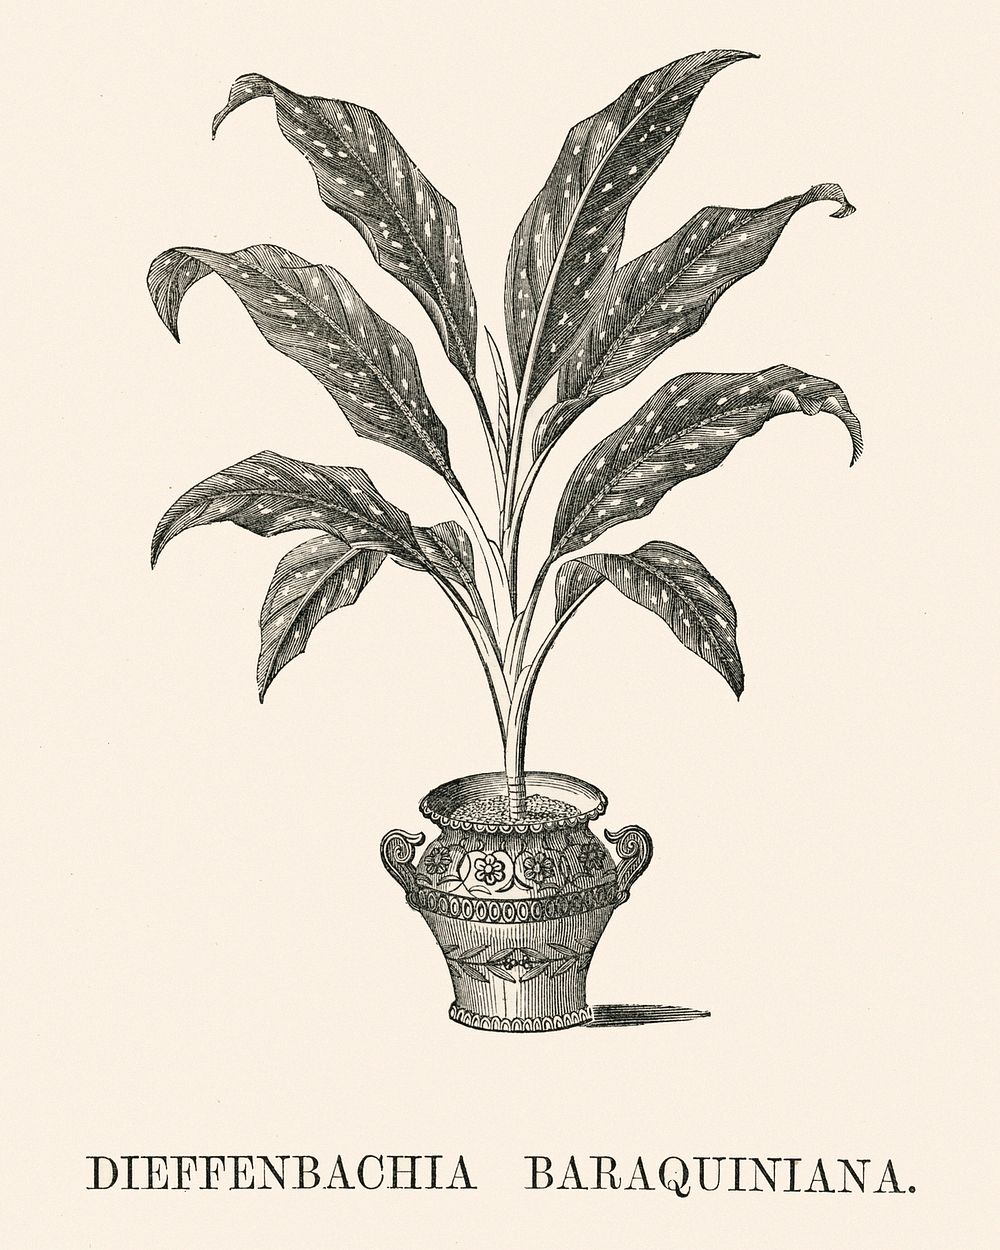 Dieffenbachia Baraquiniana engraved by Benjamin Fawcett (1808-1893) for Shirley Hibberd&rsquo;s (1825-1890) New and Rare…